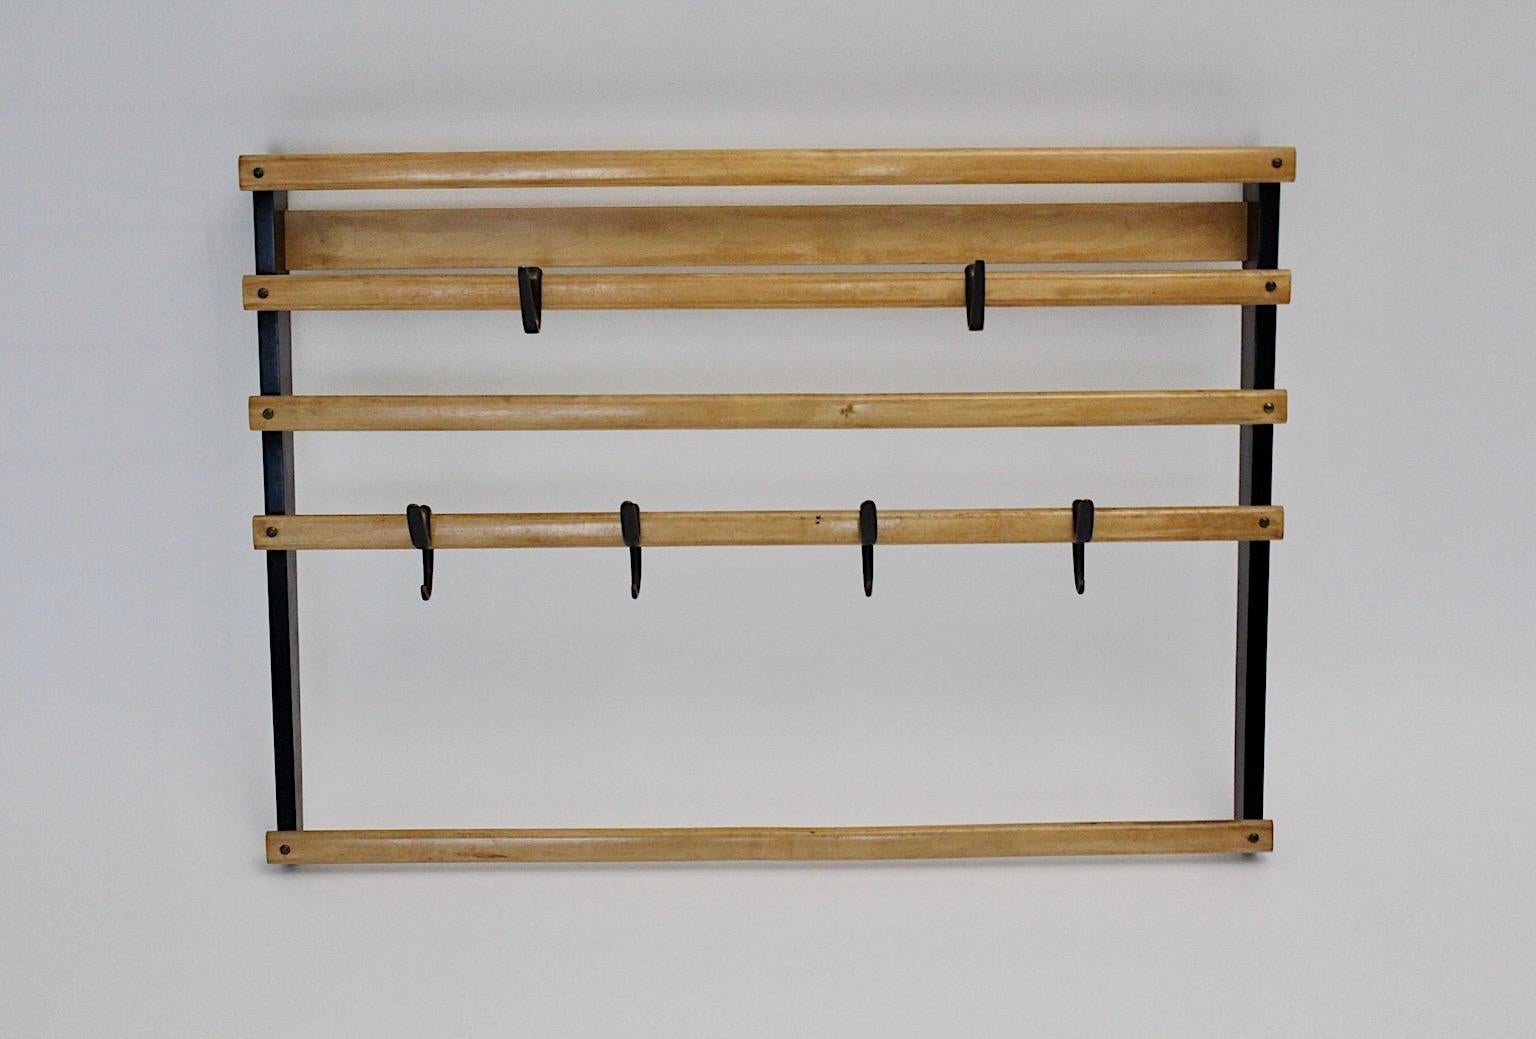 Mid-Century Modern vintage original Carl Auböck coat rack or wardrobe from beech with six brass hooks Vienna 1950s
While the wall mounted wardrobe or coat rack is made from black and colorless lacquered solid beech, the six hooks are partly